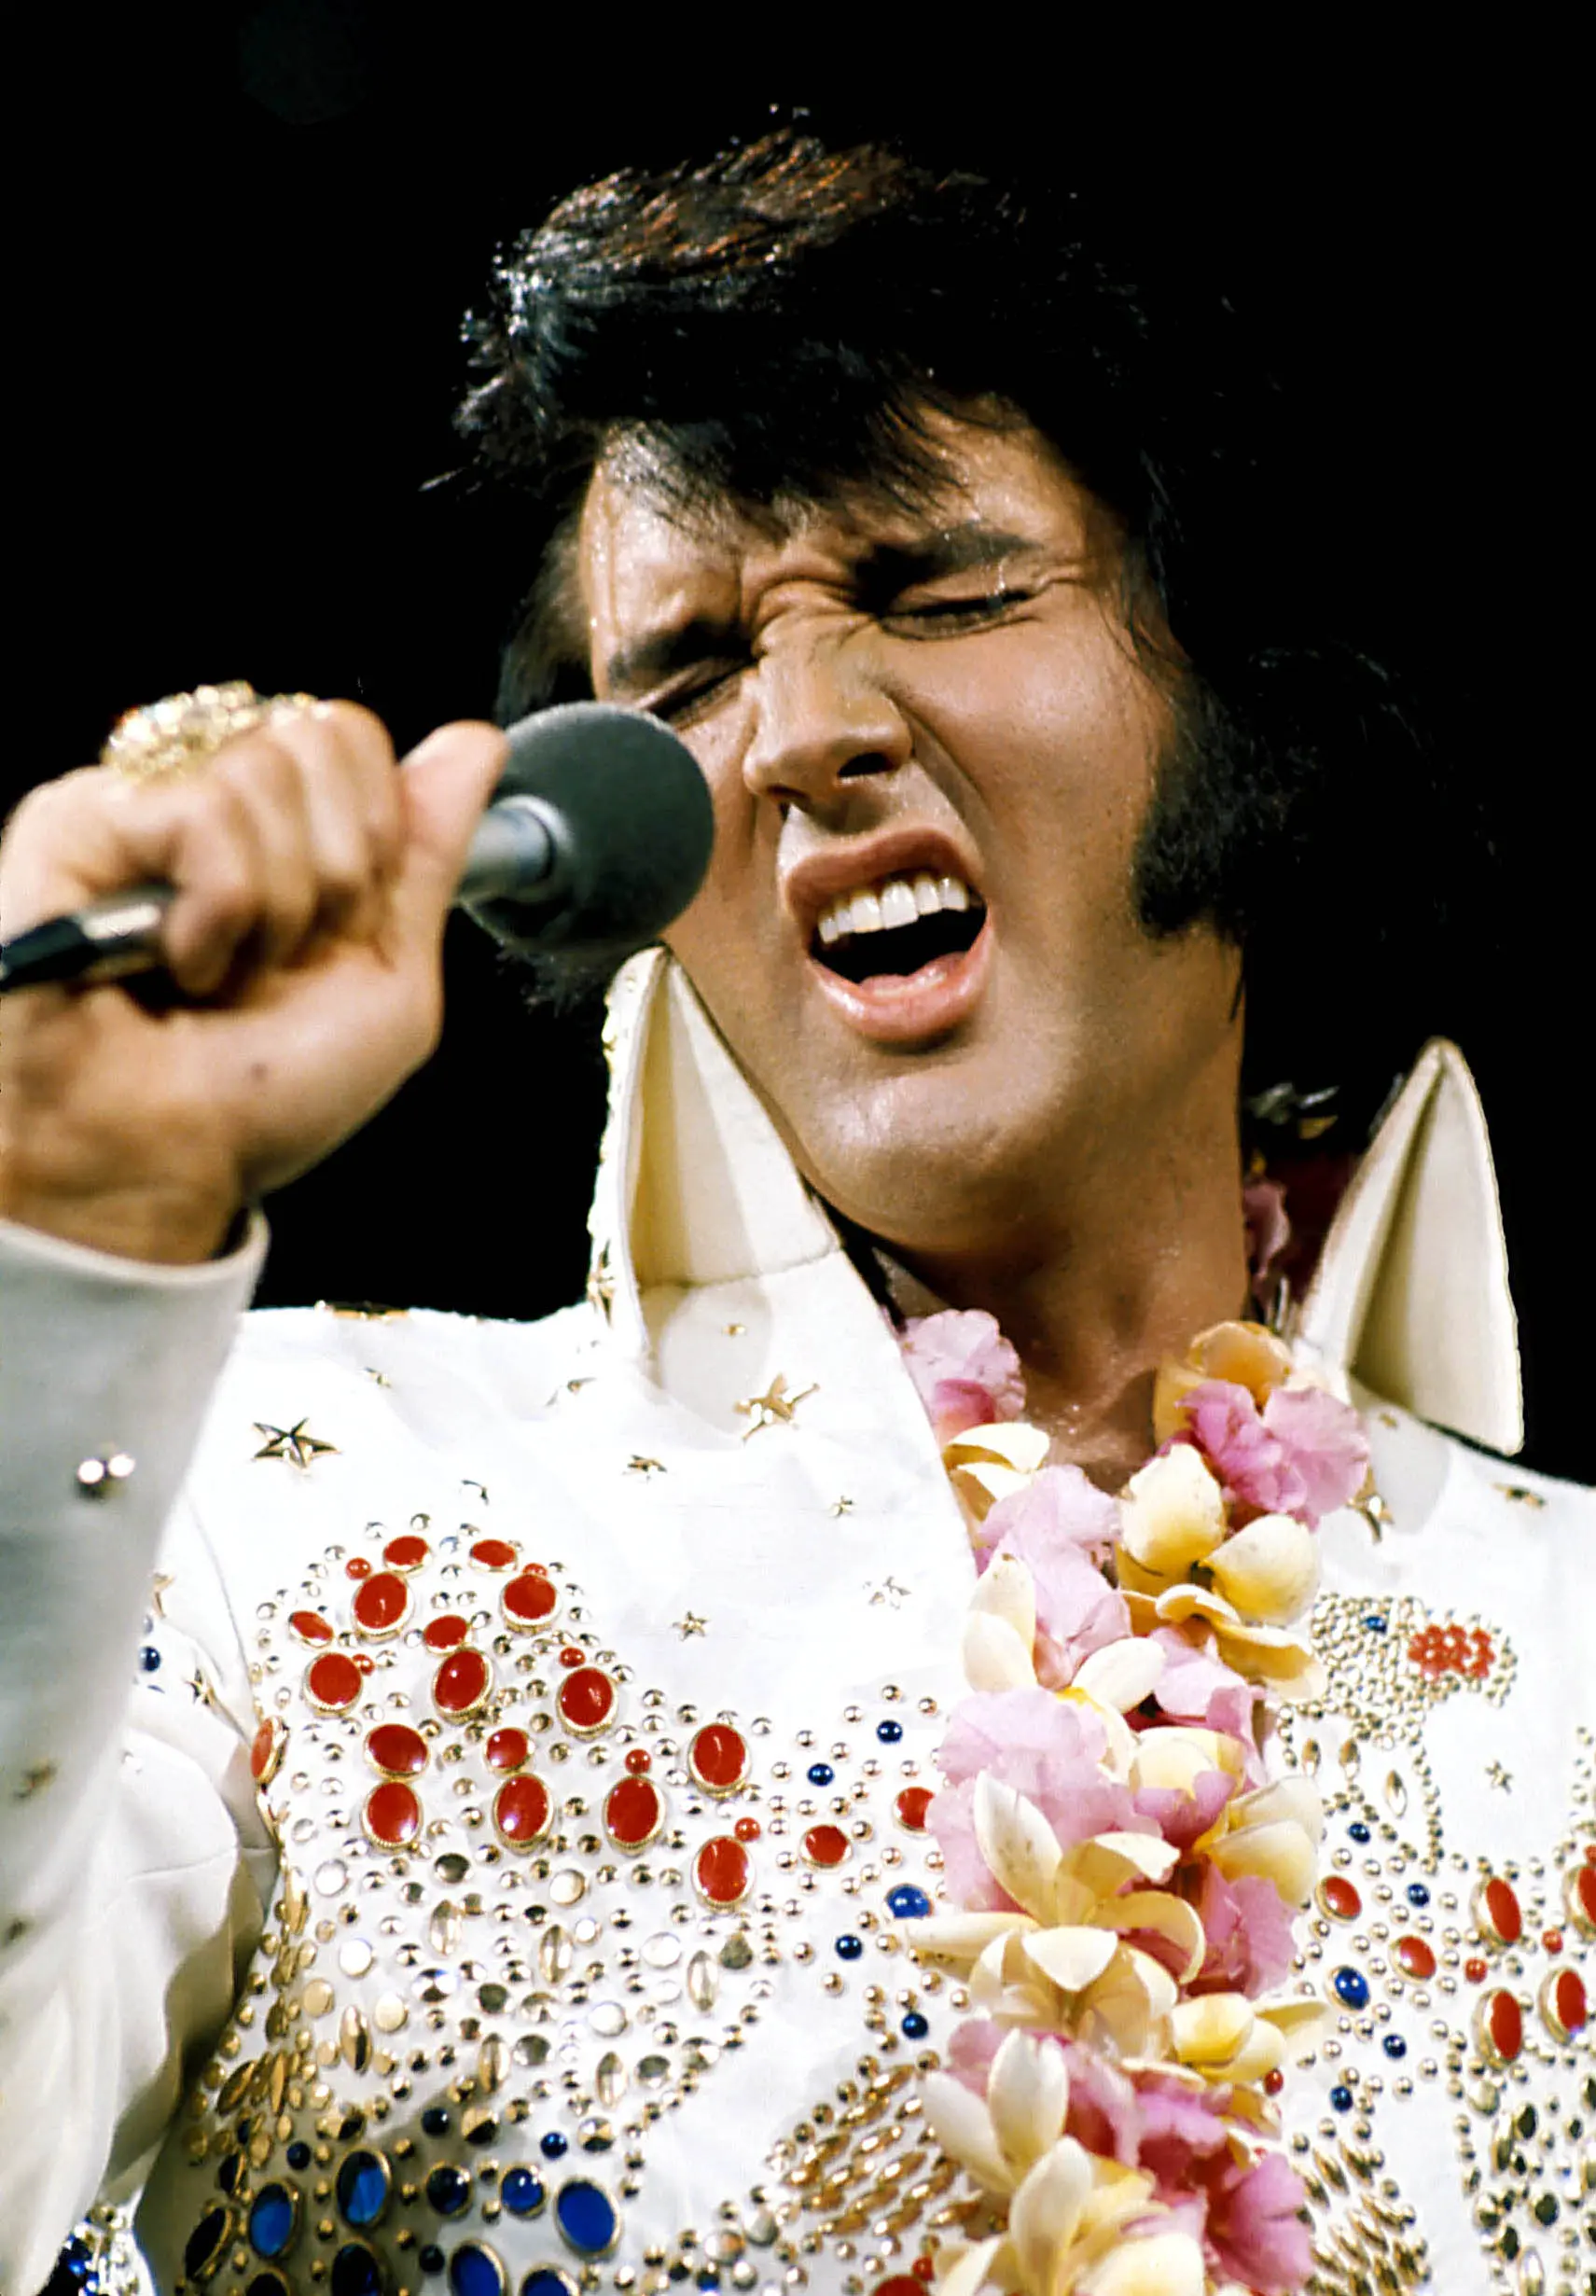 Marking The Anniversary Of Elvis Presley's Death, Over 700 Fans Expected To Attend Vigil